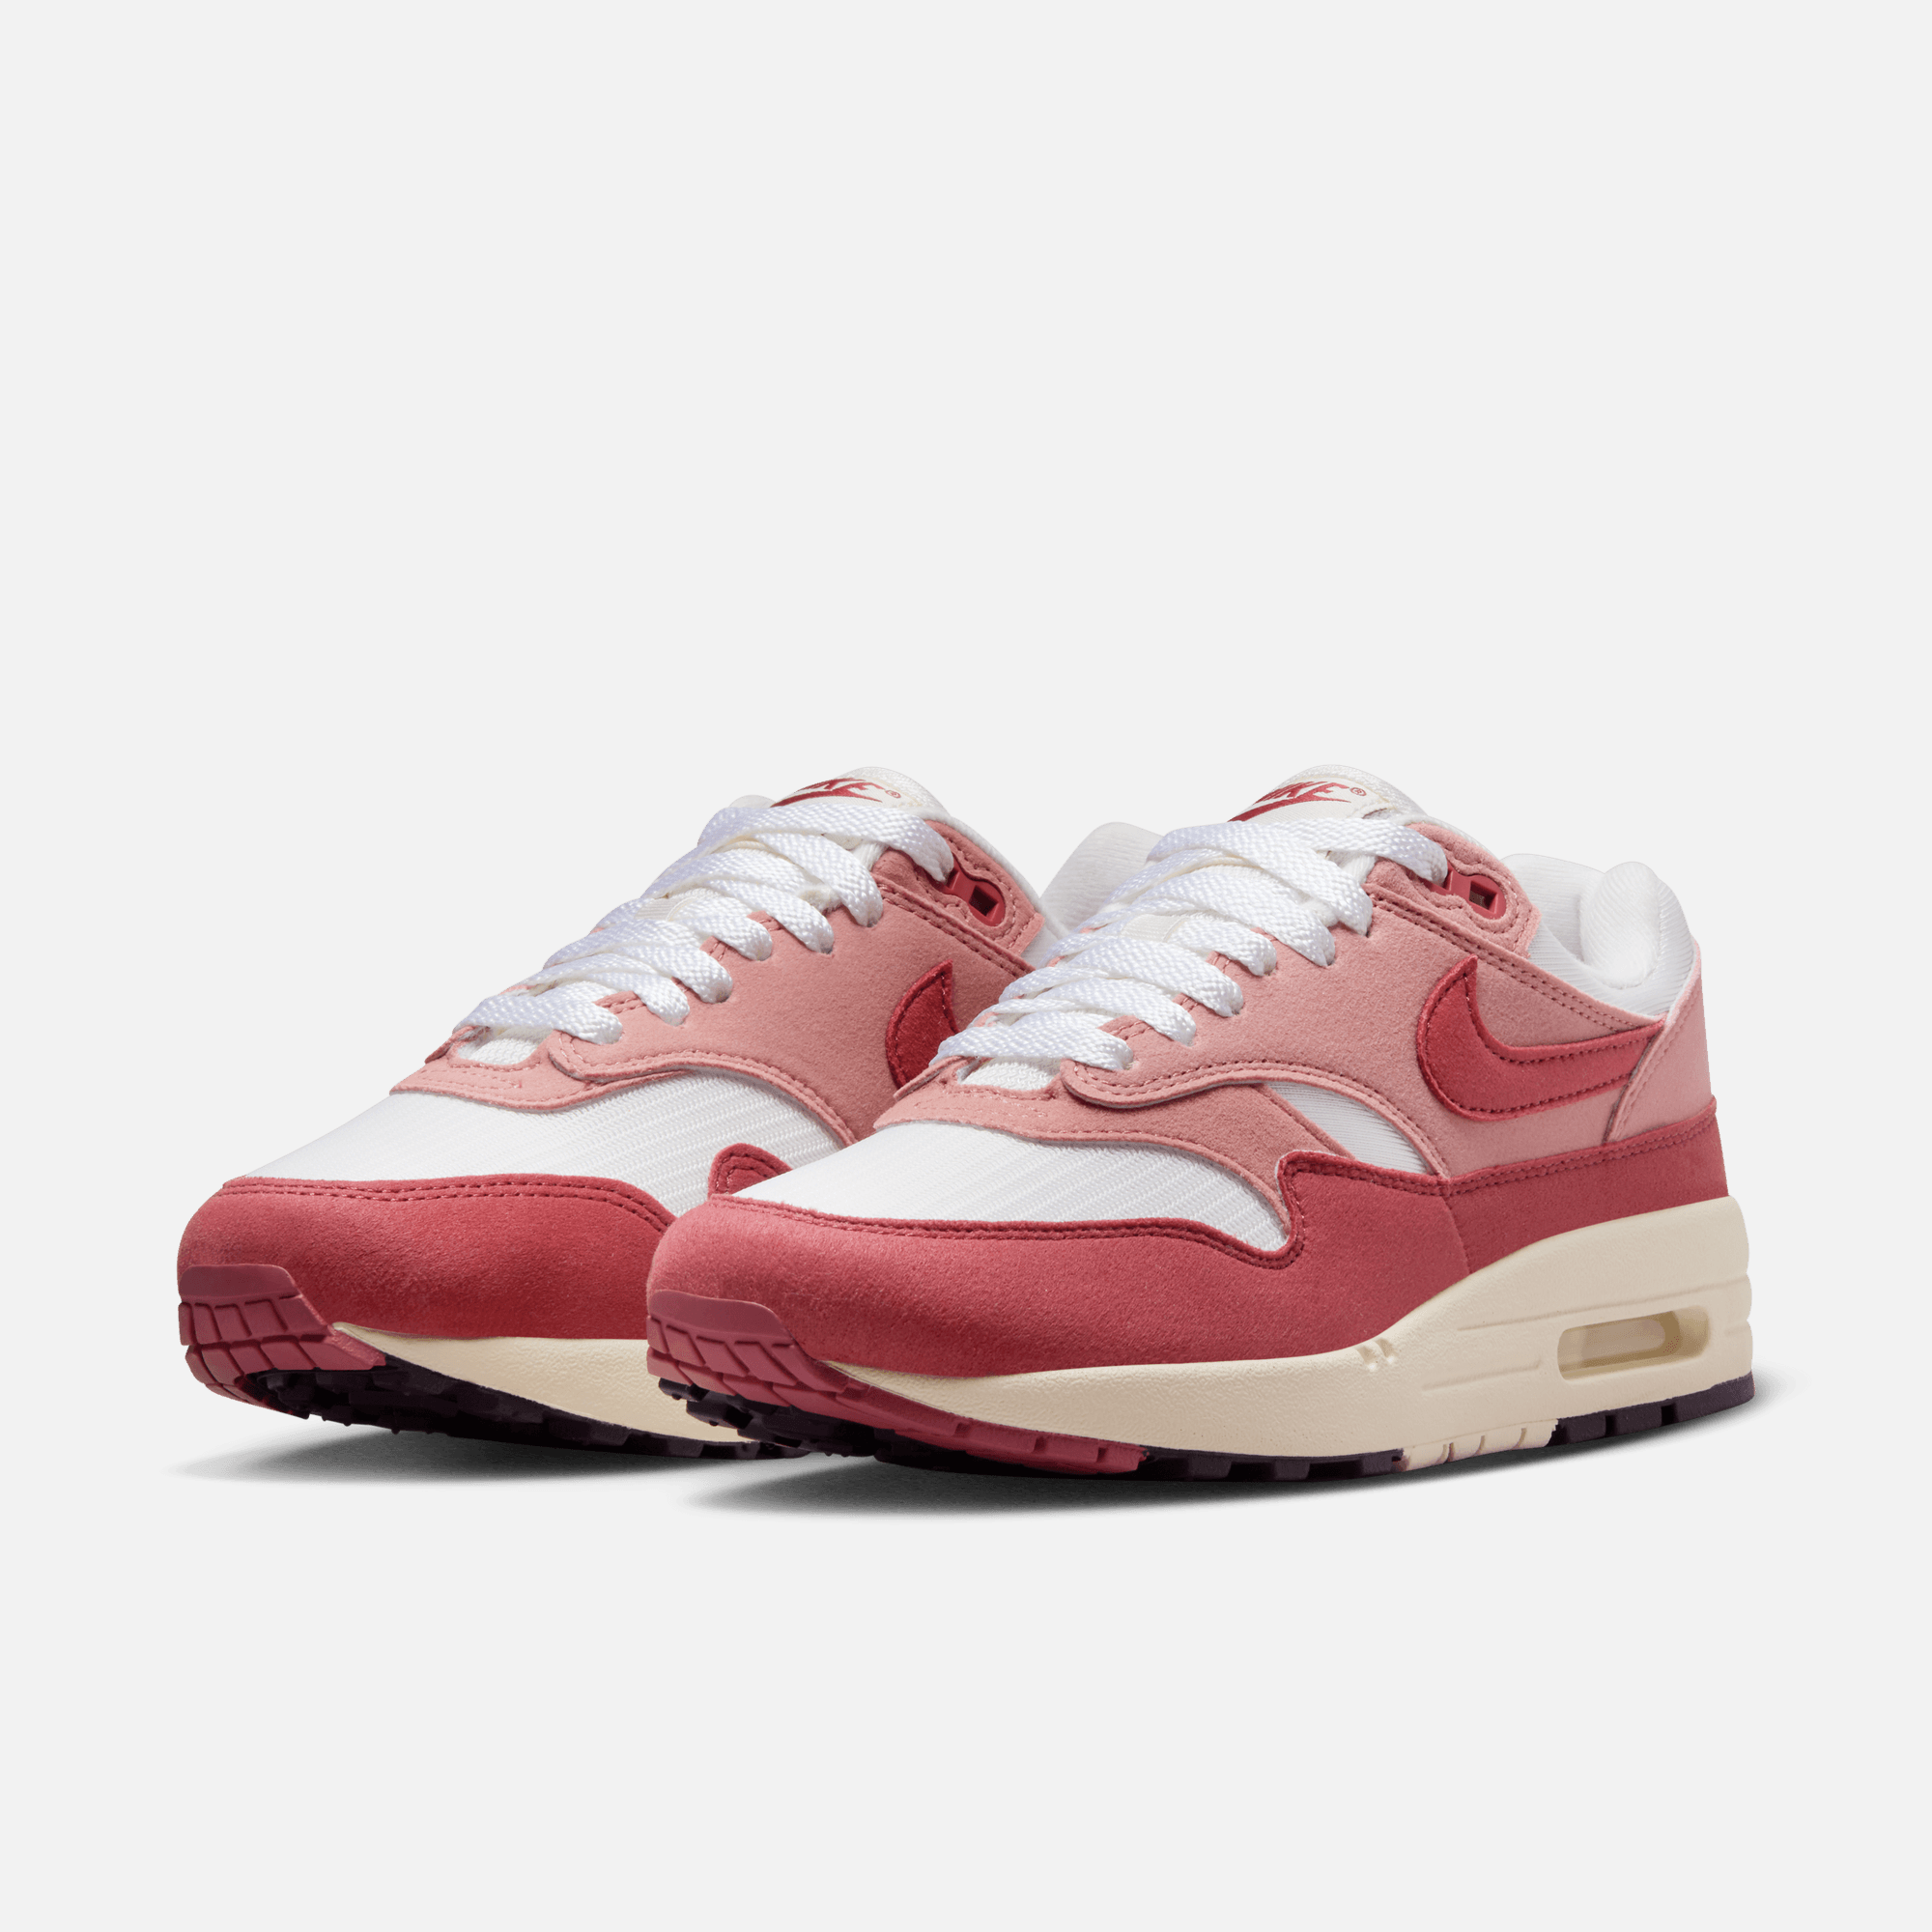 Nike Women's Air Max 1 Red Stardust